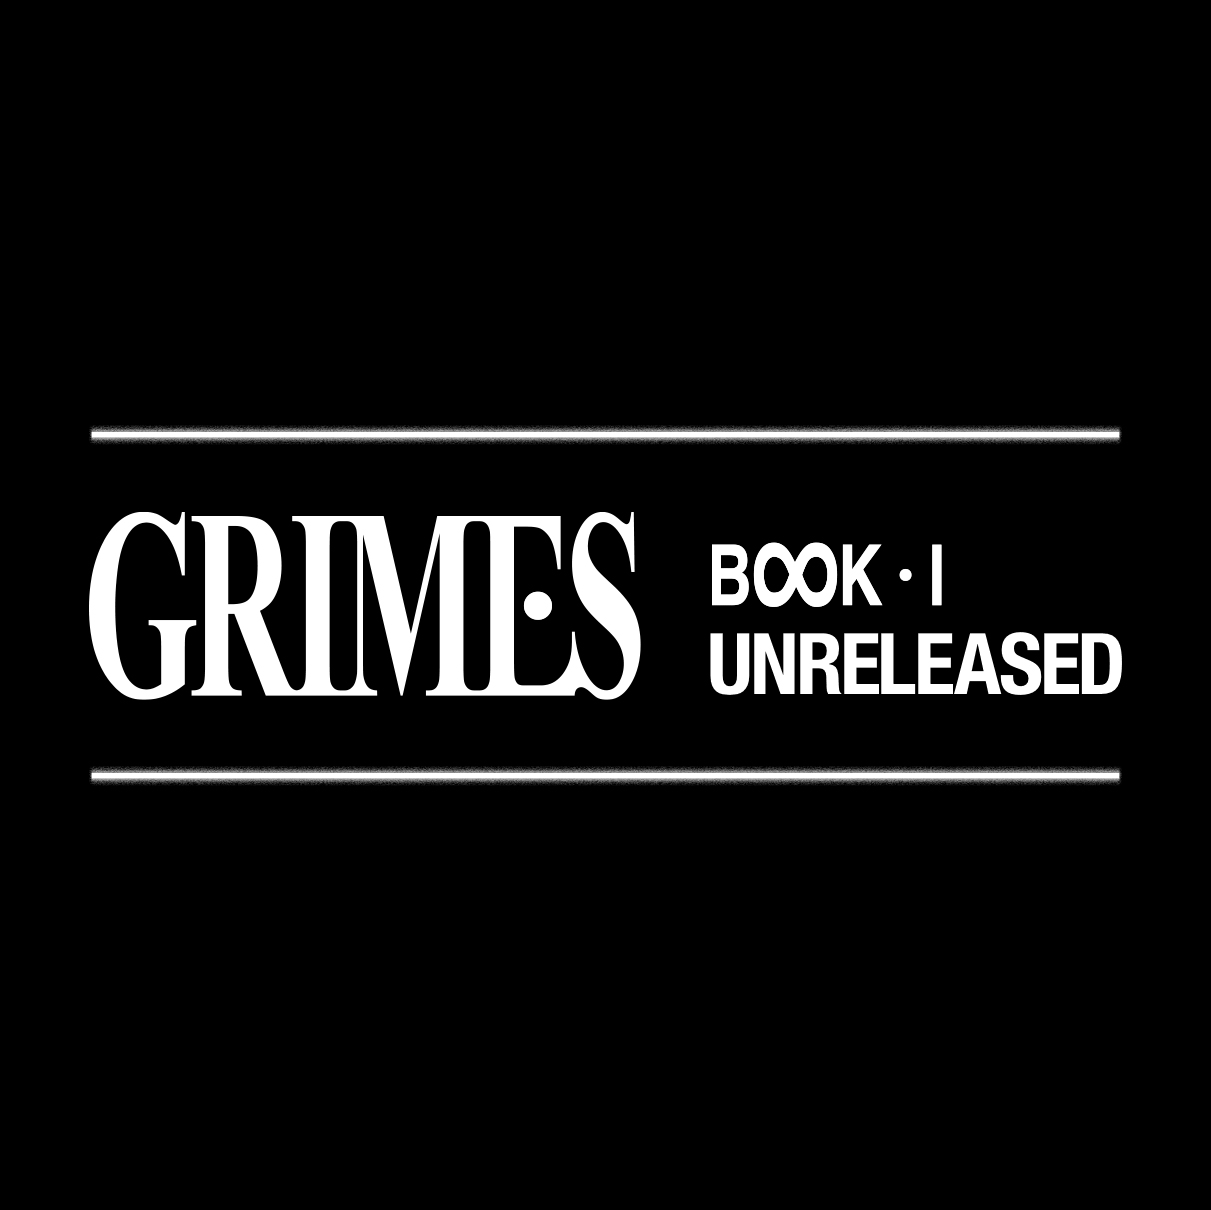 Player of Games, Grimes Wiki